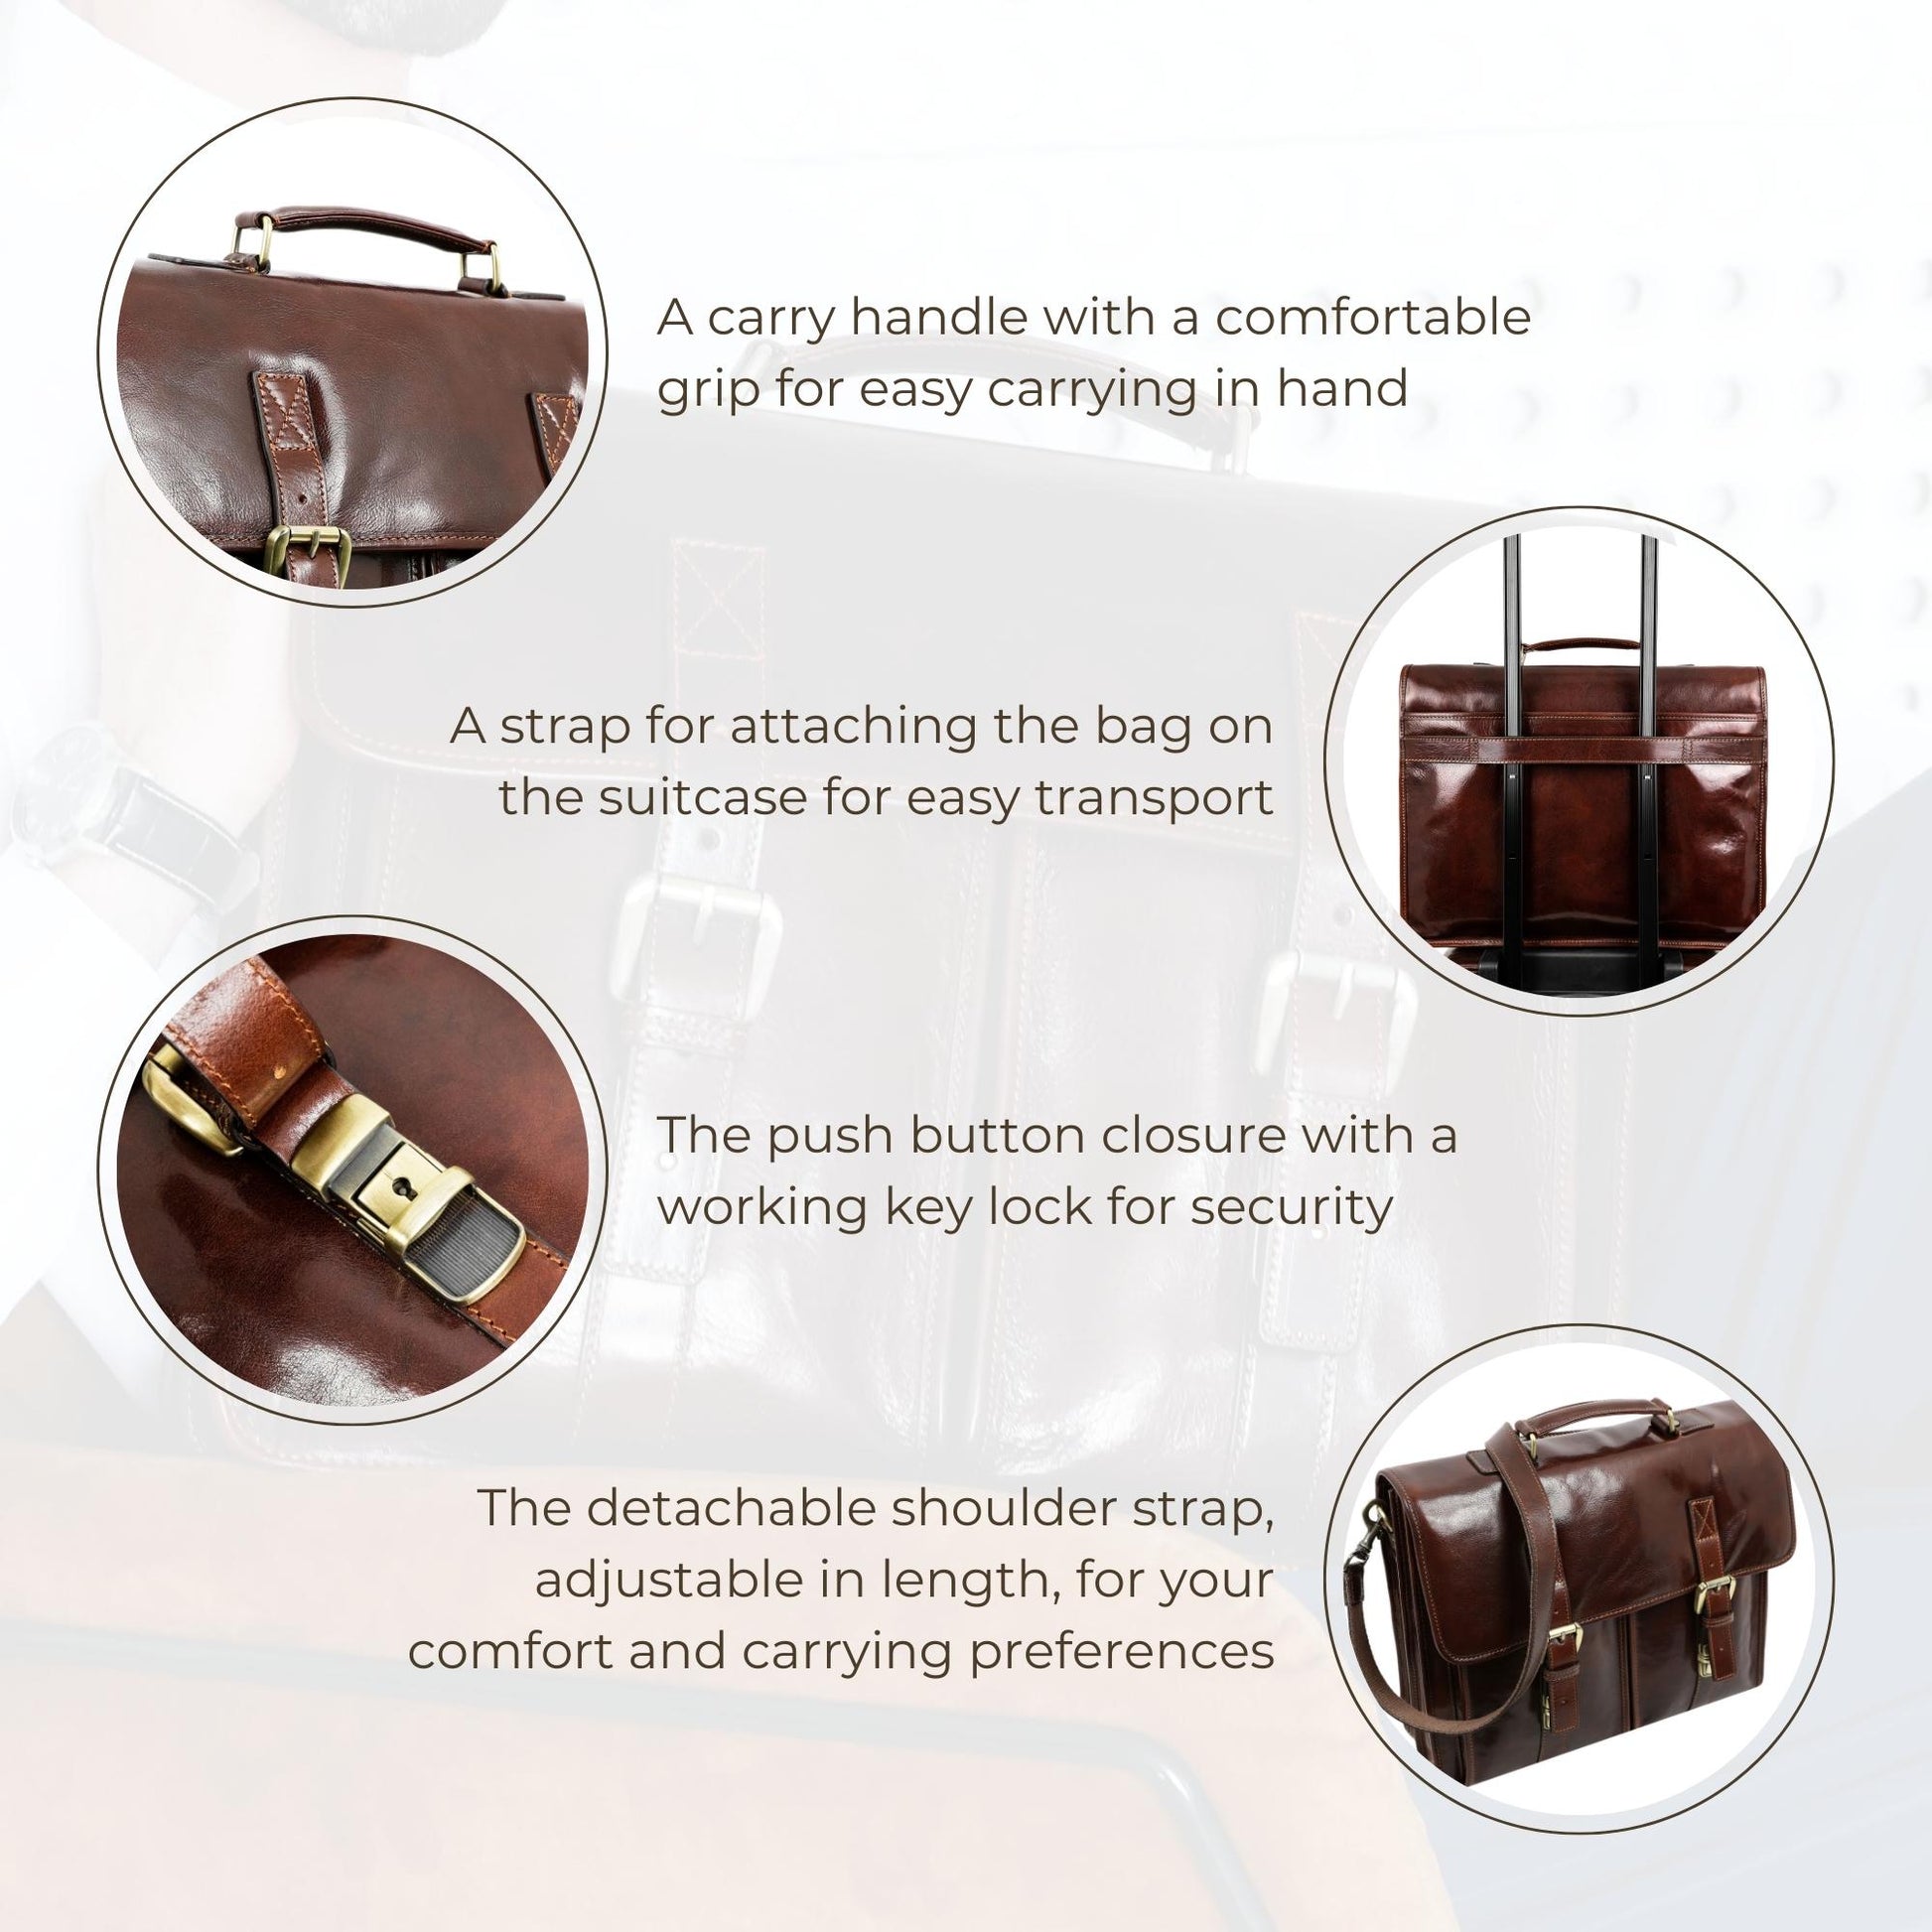 Leather Briefcase, Satchel Bag - The Time Machine Briefcase Time Resistance   